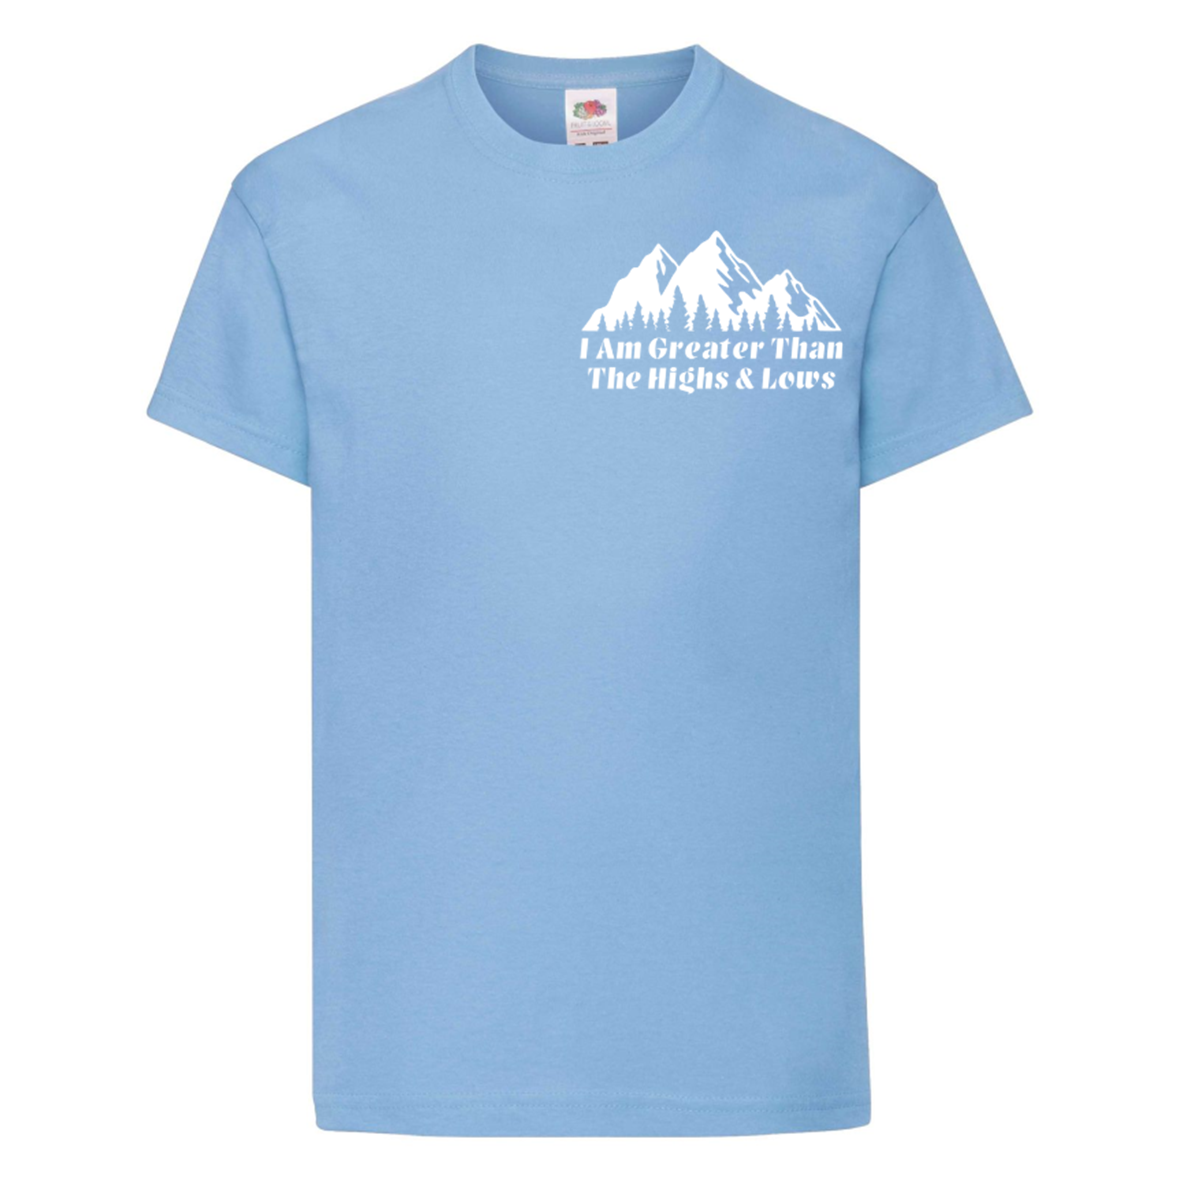 I Am Greater Than The Highs & Lows Kids T Shirt